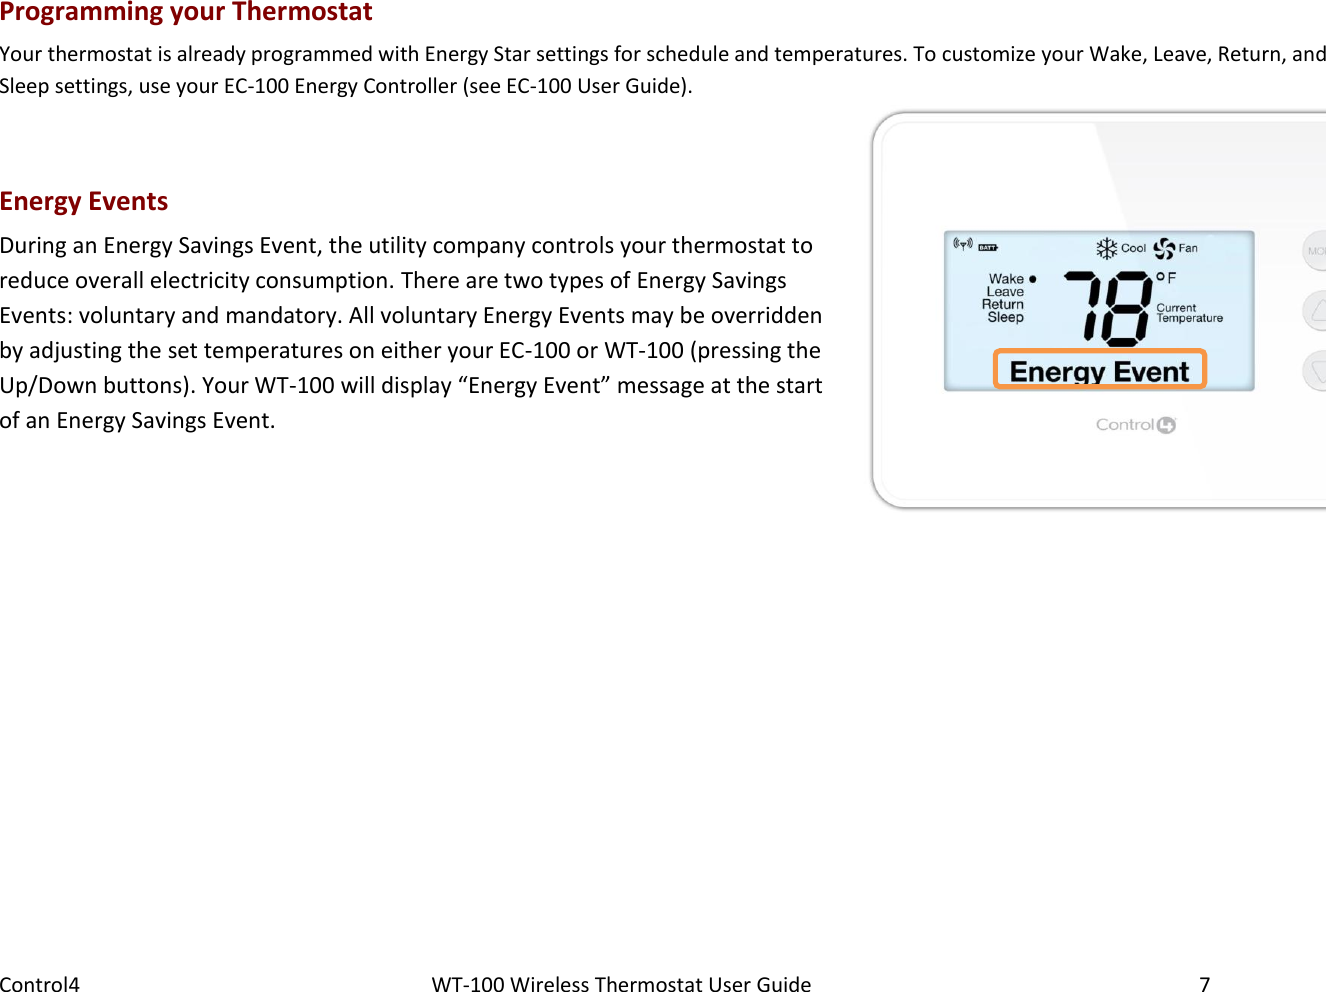 Control4                                                      WT-100 Wireless Thermostat User Guide        7 Programming your Thermostat Your thermostat is already programmed with Energy Star settings for schedule and temperatures. To customize your Wake, Leave, Return, and Sleep settings, use your EC-100 Energy Controller (see EC-100 User Guide).  Energy Events During an Energy Savings Event, the utility company controls your thermostat to reduce overall electricity consumption. There are two types of Energy Savings Events: voluntary and mandatory. All voluntary Energy Events may be overridden by adjusting the set temperatures on either your EC-100 or WT-100 (pressing the Up/Down buttons). Your WT-100 will display “Energy Event” message at the start of an Energy Savings Event.  